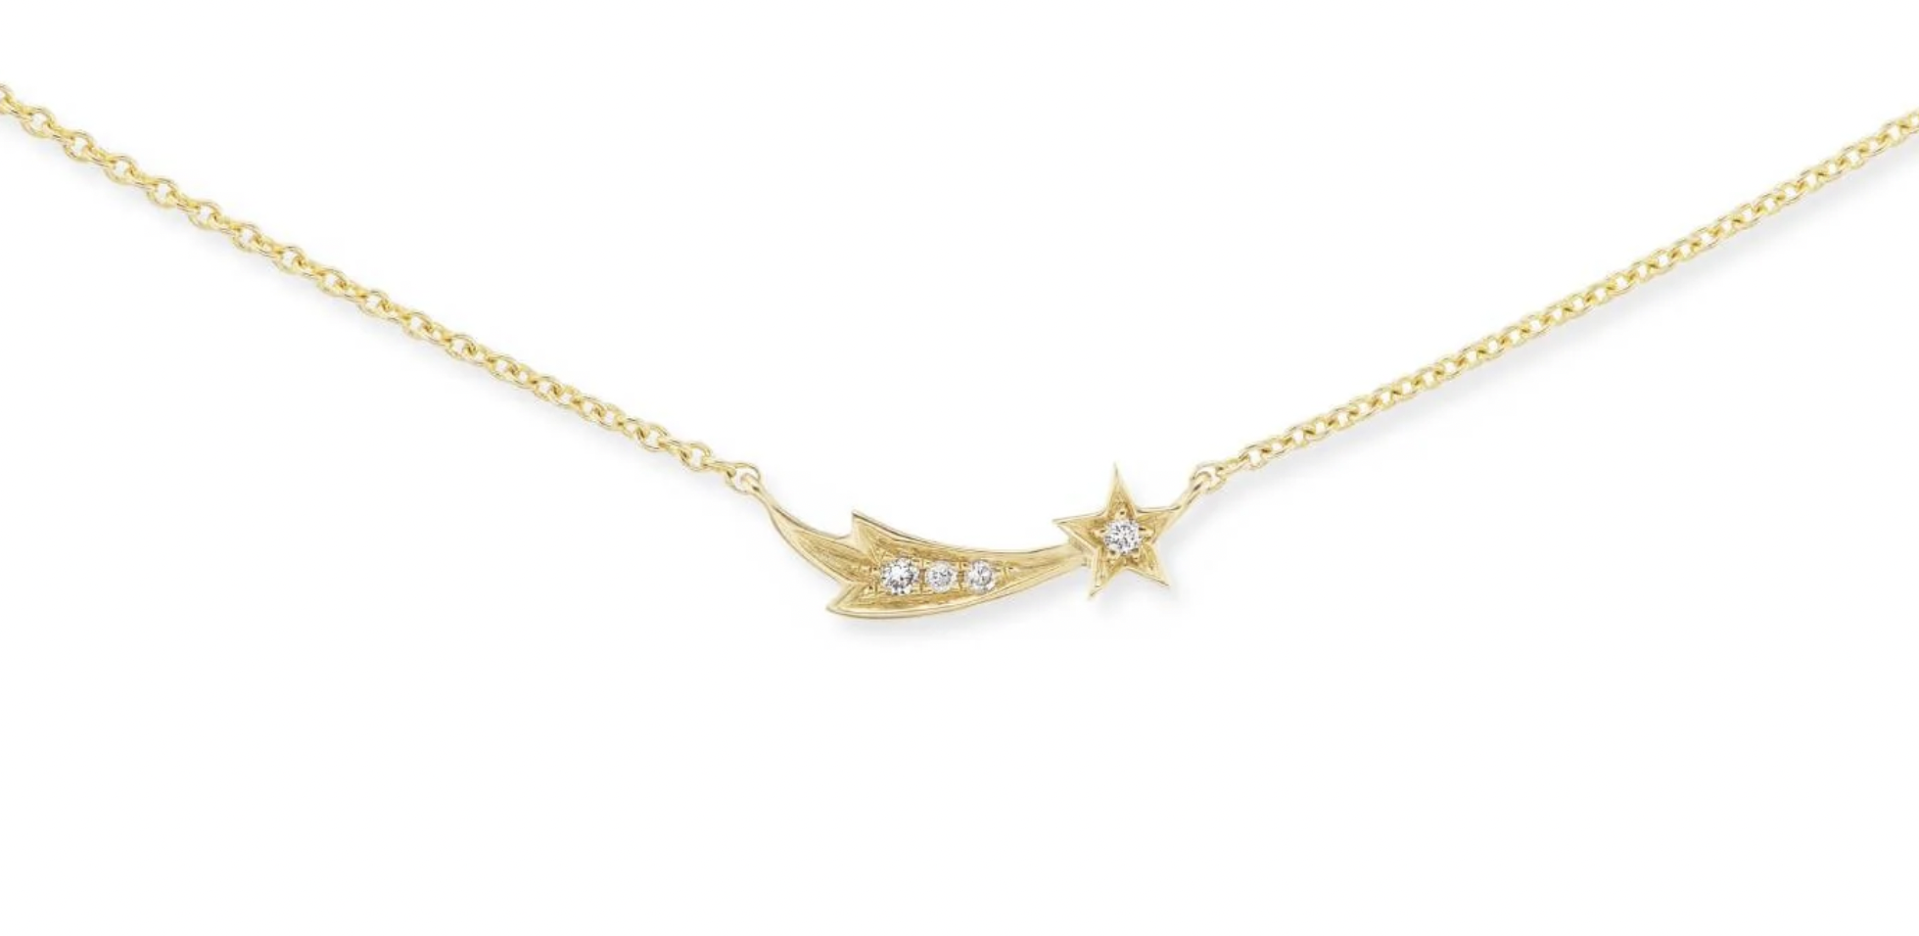 4 Element Shooting Star Charm Necklace by Ana Katarina